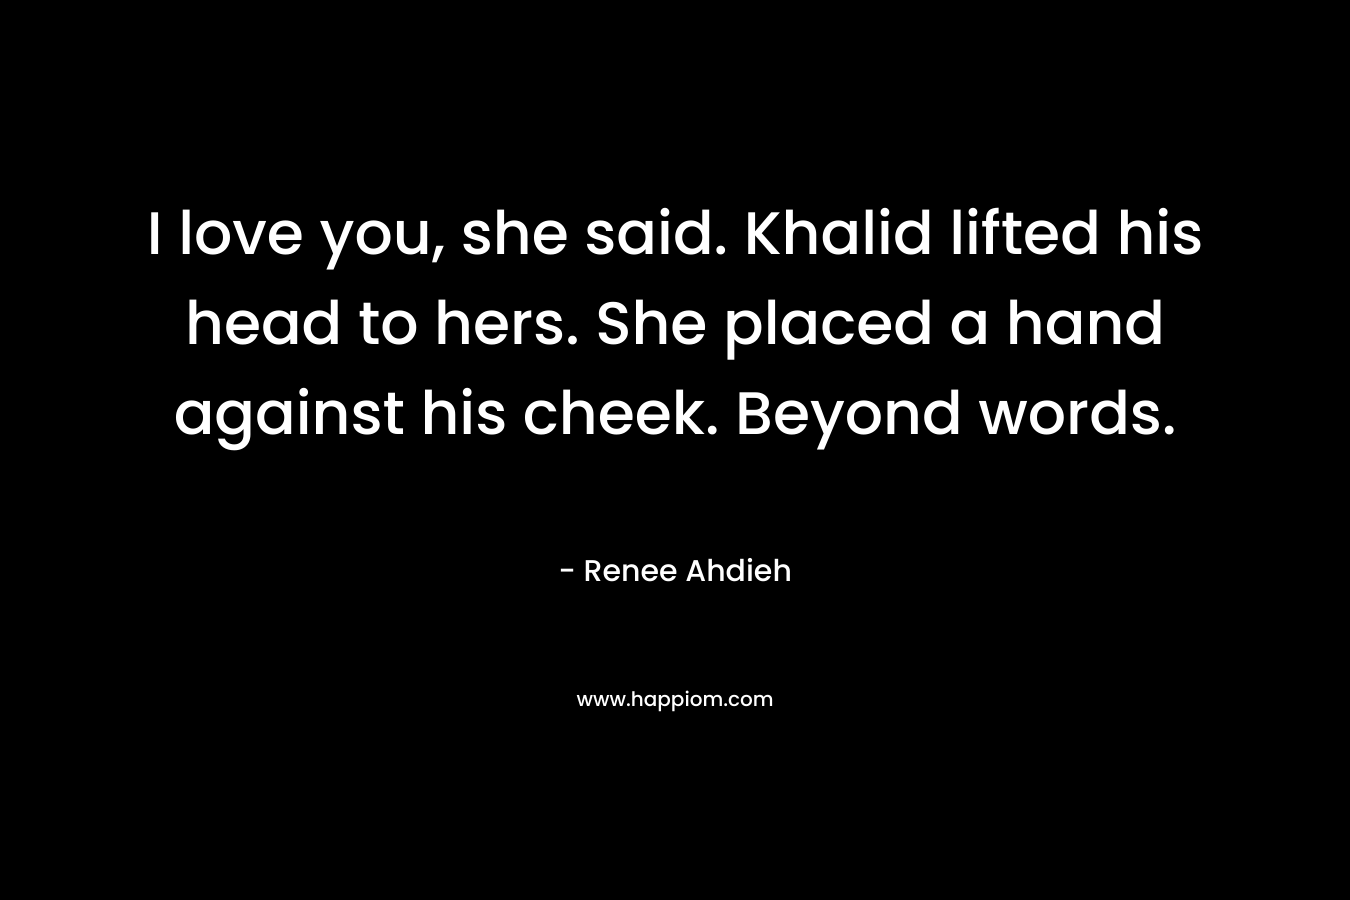 I love you, she said. Khalid lifted his head to hers. She placed a hand against his cheek. Beyond words. – Renee Ahdieh